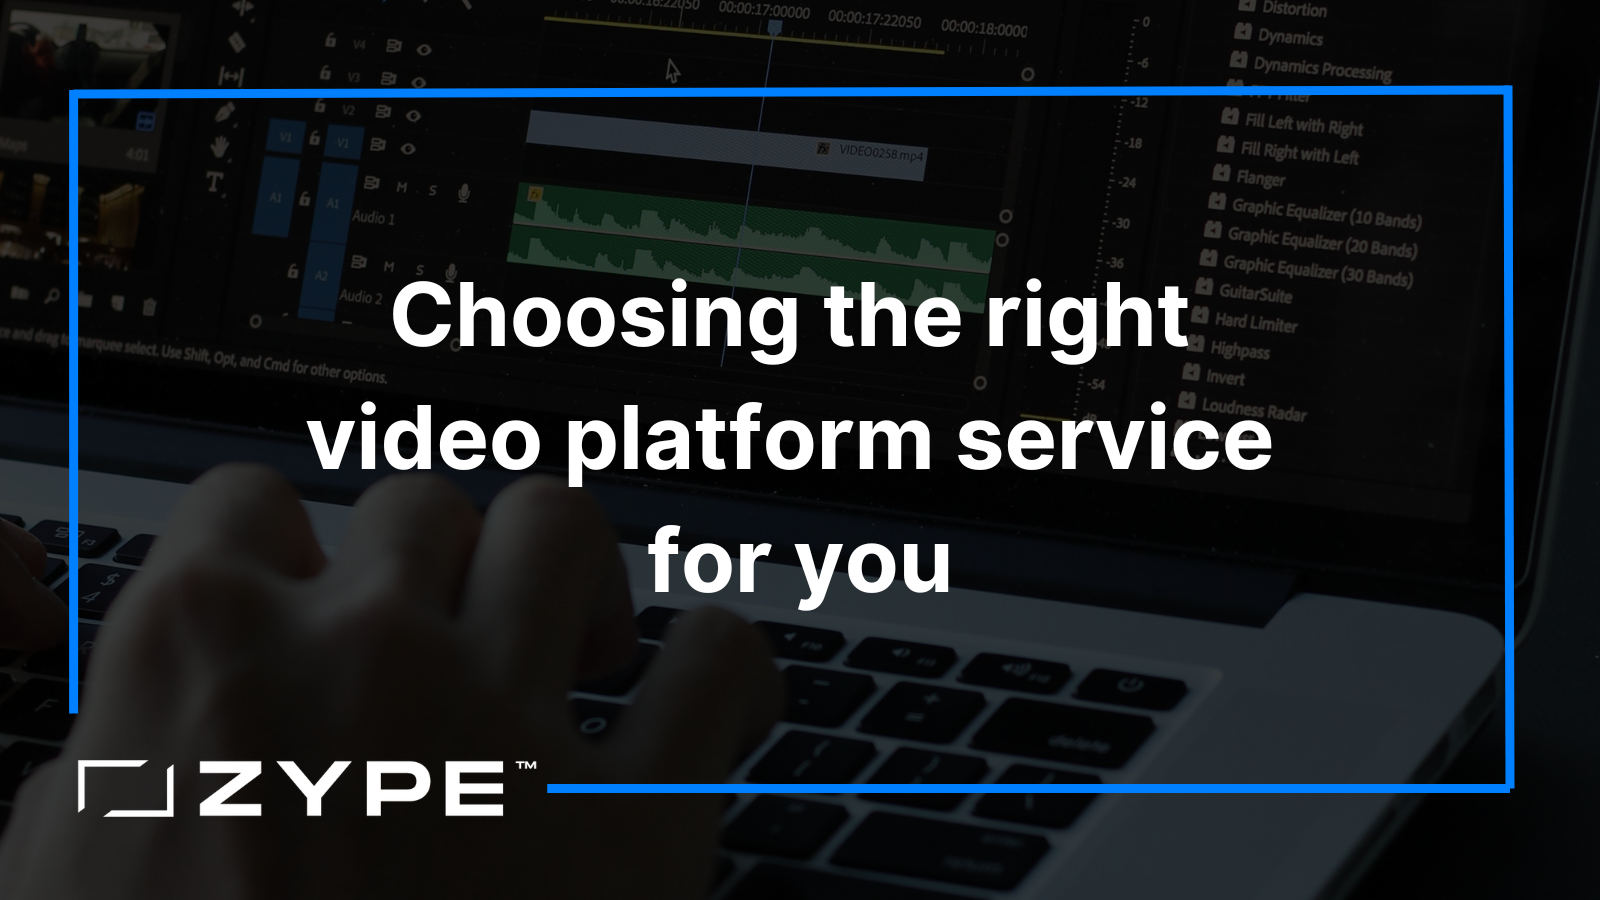 The Best Video Platform Service for You